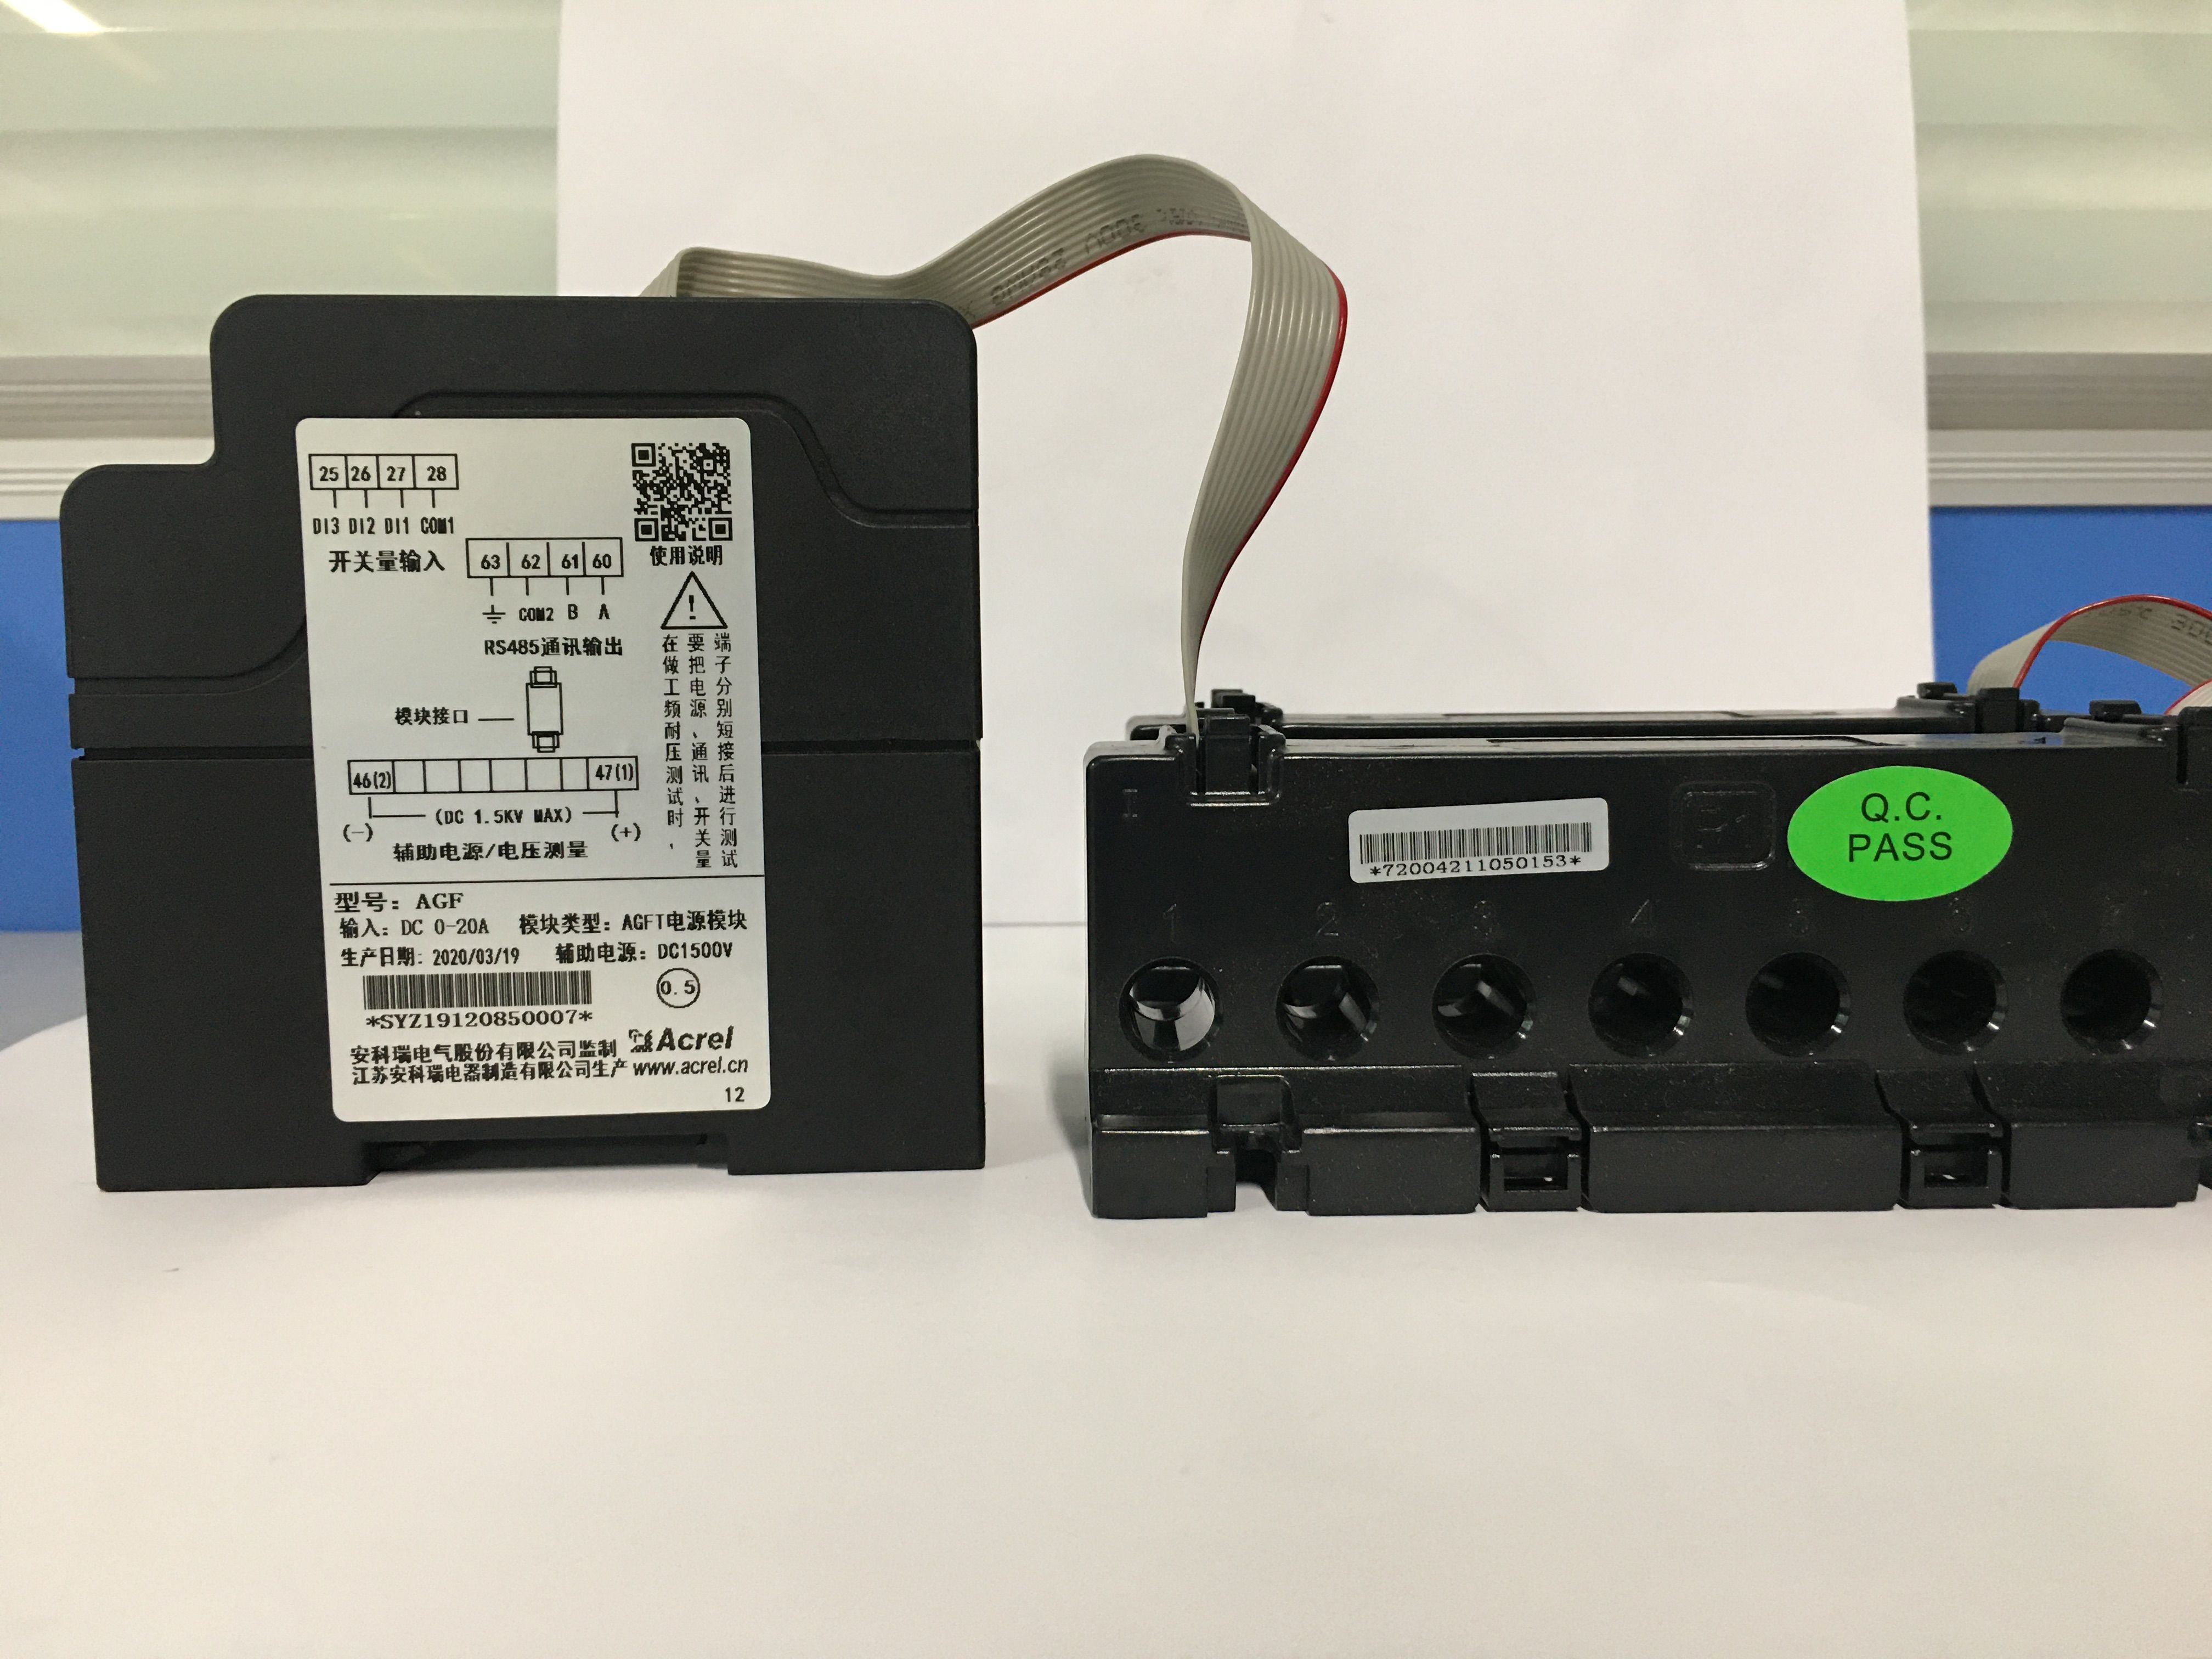 AGFT PV Combiner Box Collection Device(solar muliti-loops power meter)